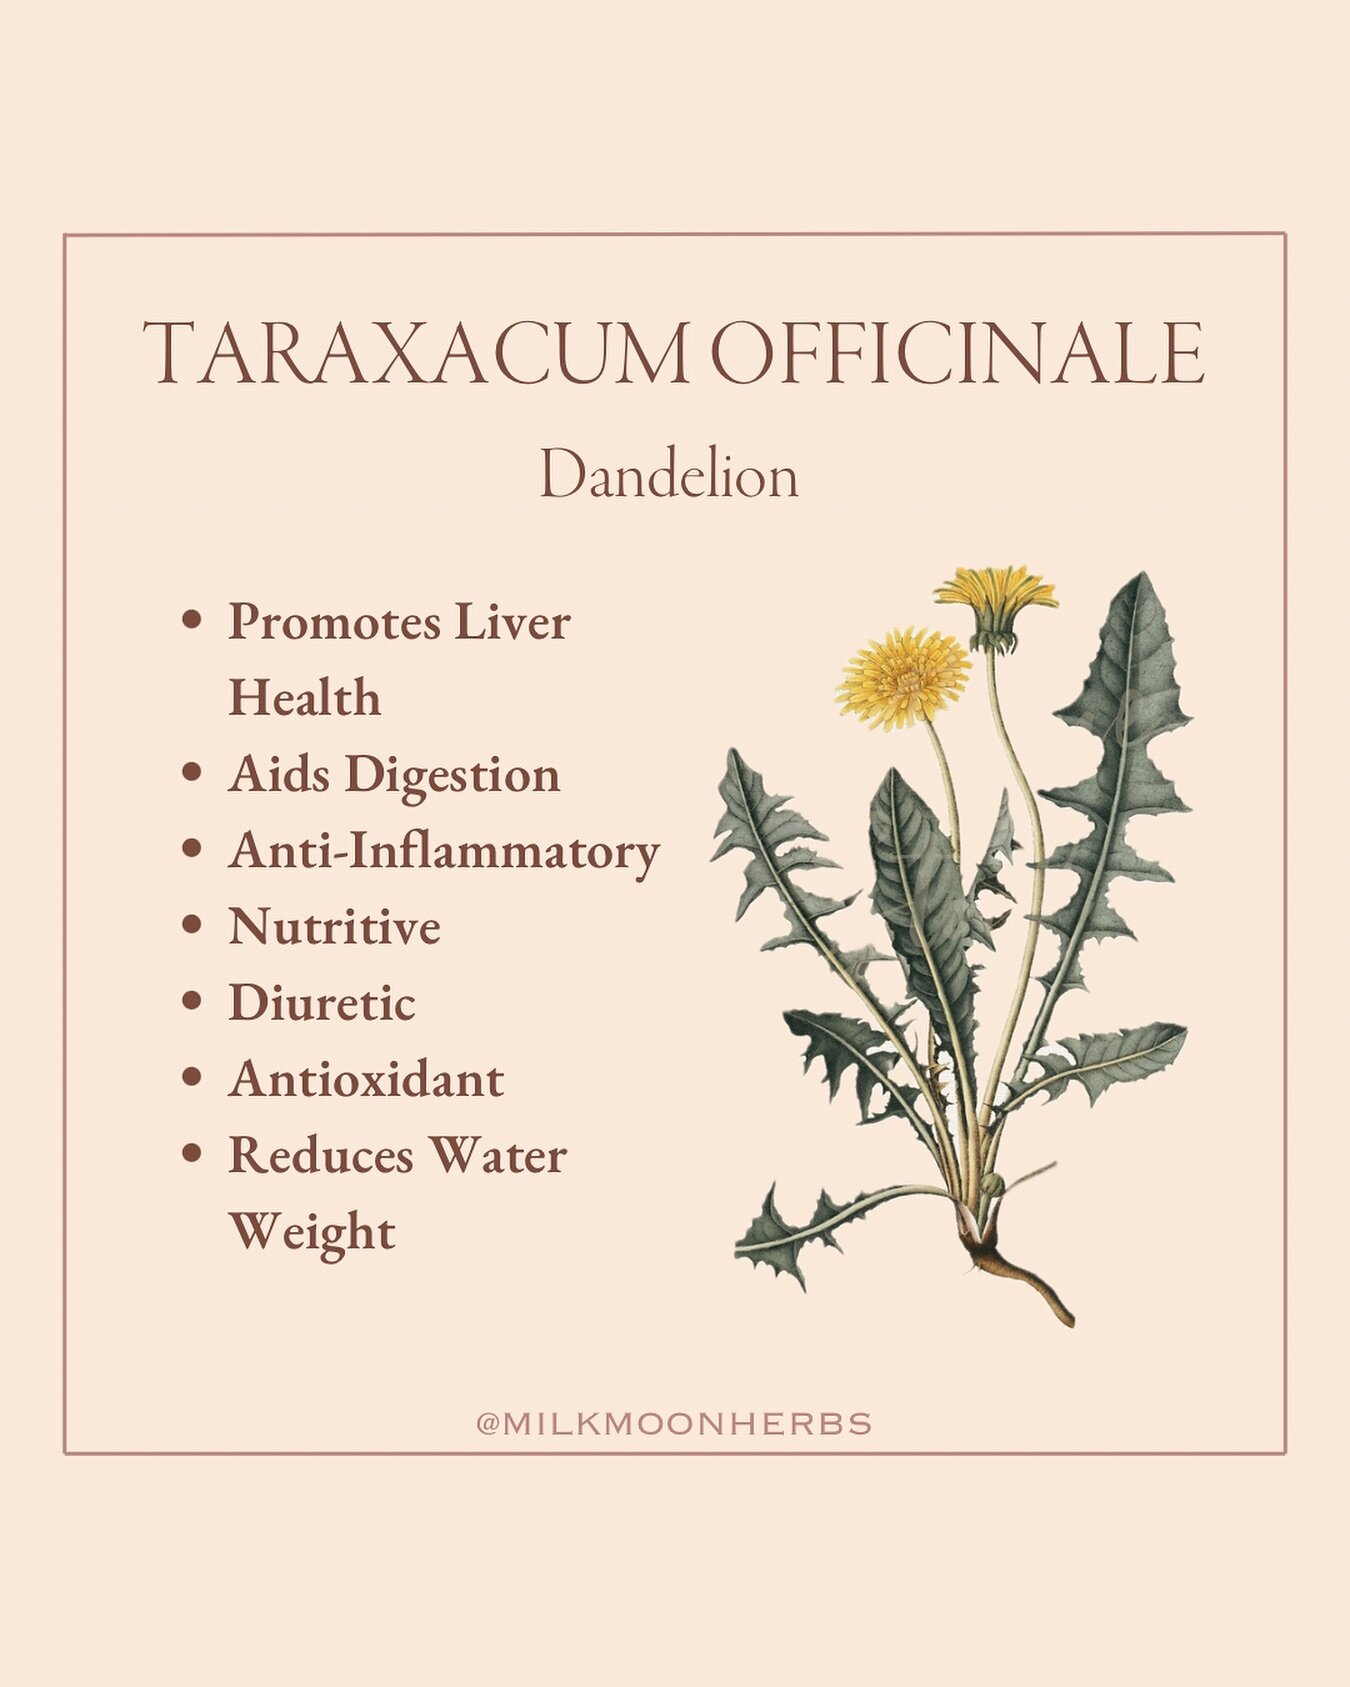 Dandelion, often overlooked as a pesky weed, is a potent herbal ally! 
Its versatility is astounding, benefiting various aspects of well-being in the postpartum period.
⁠
✨Firstly, dandelion is a liver-loving powerhouse, promoting healthy liver funct